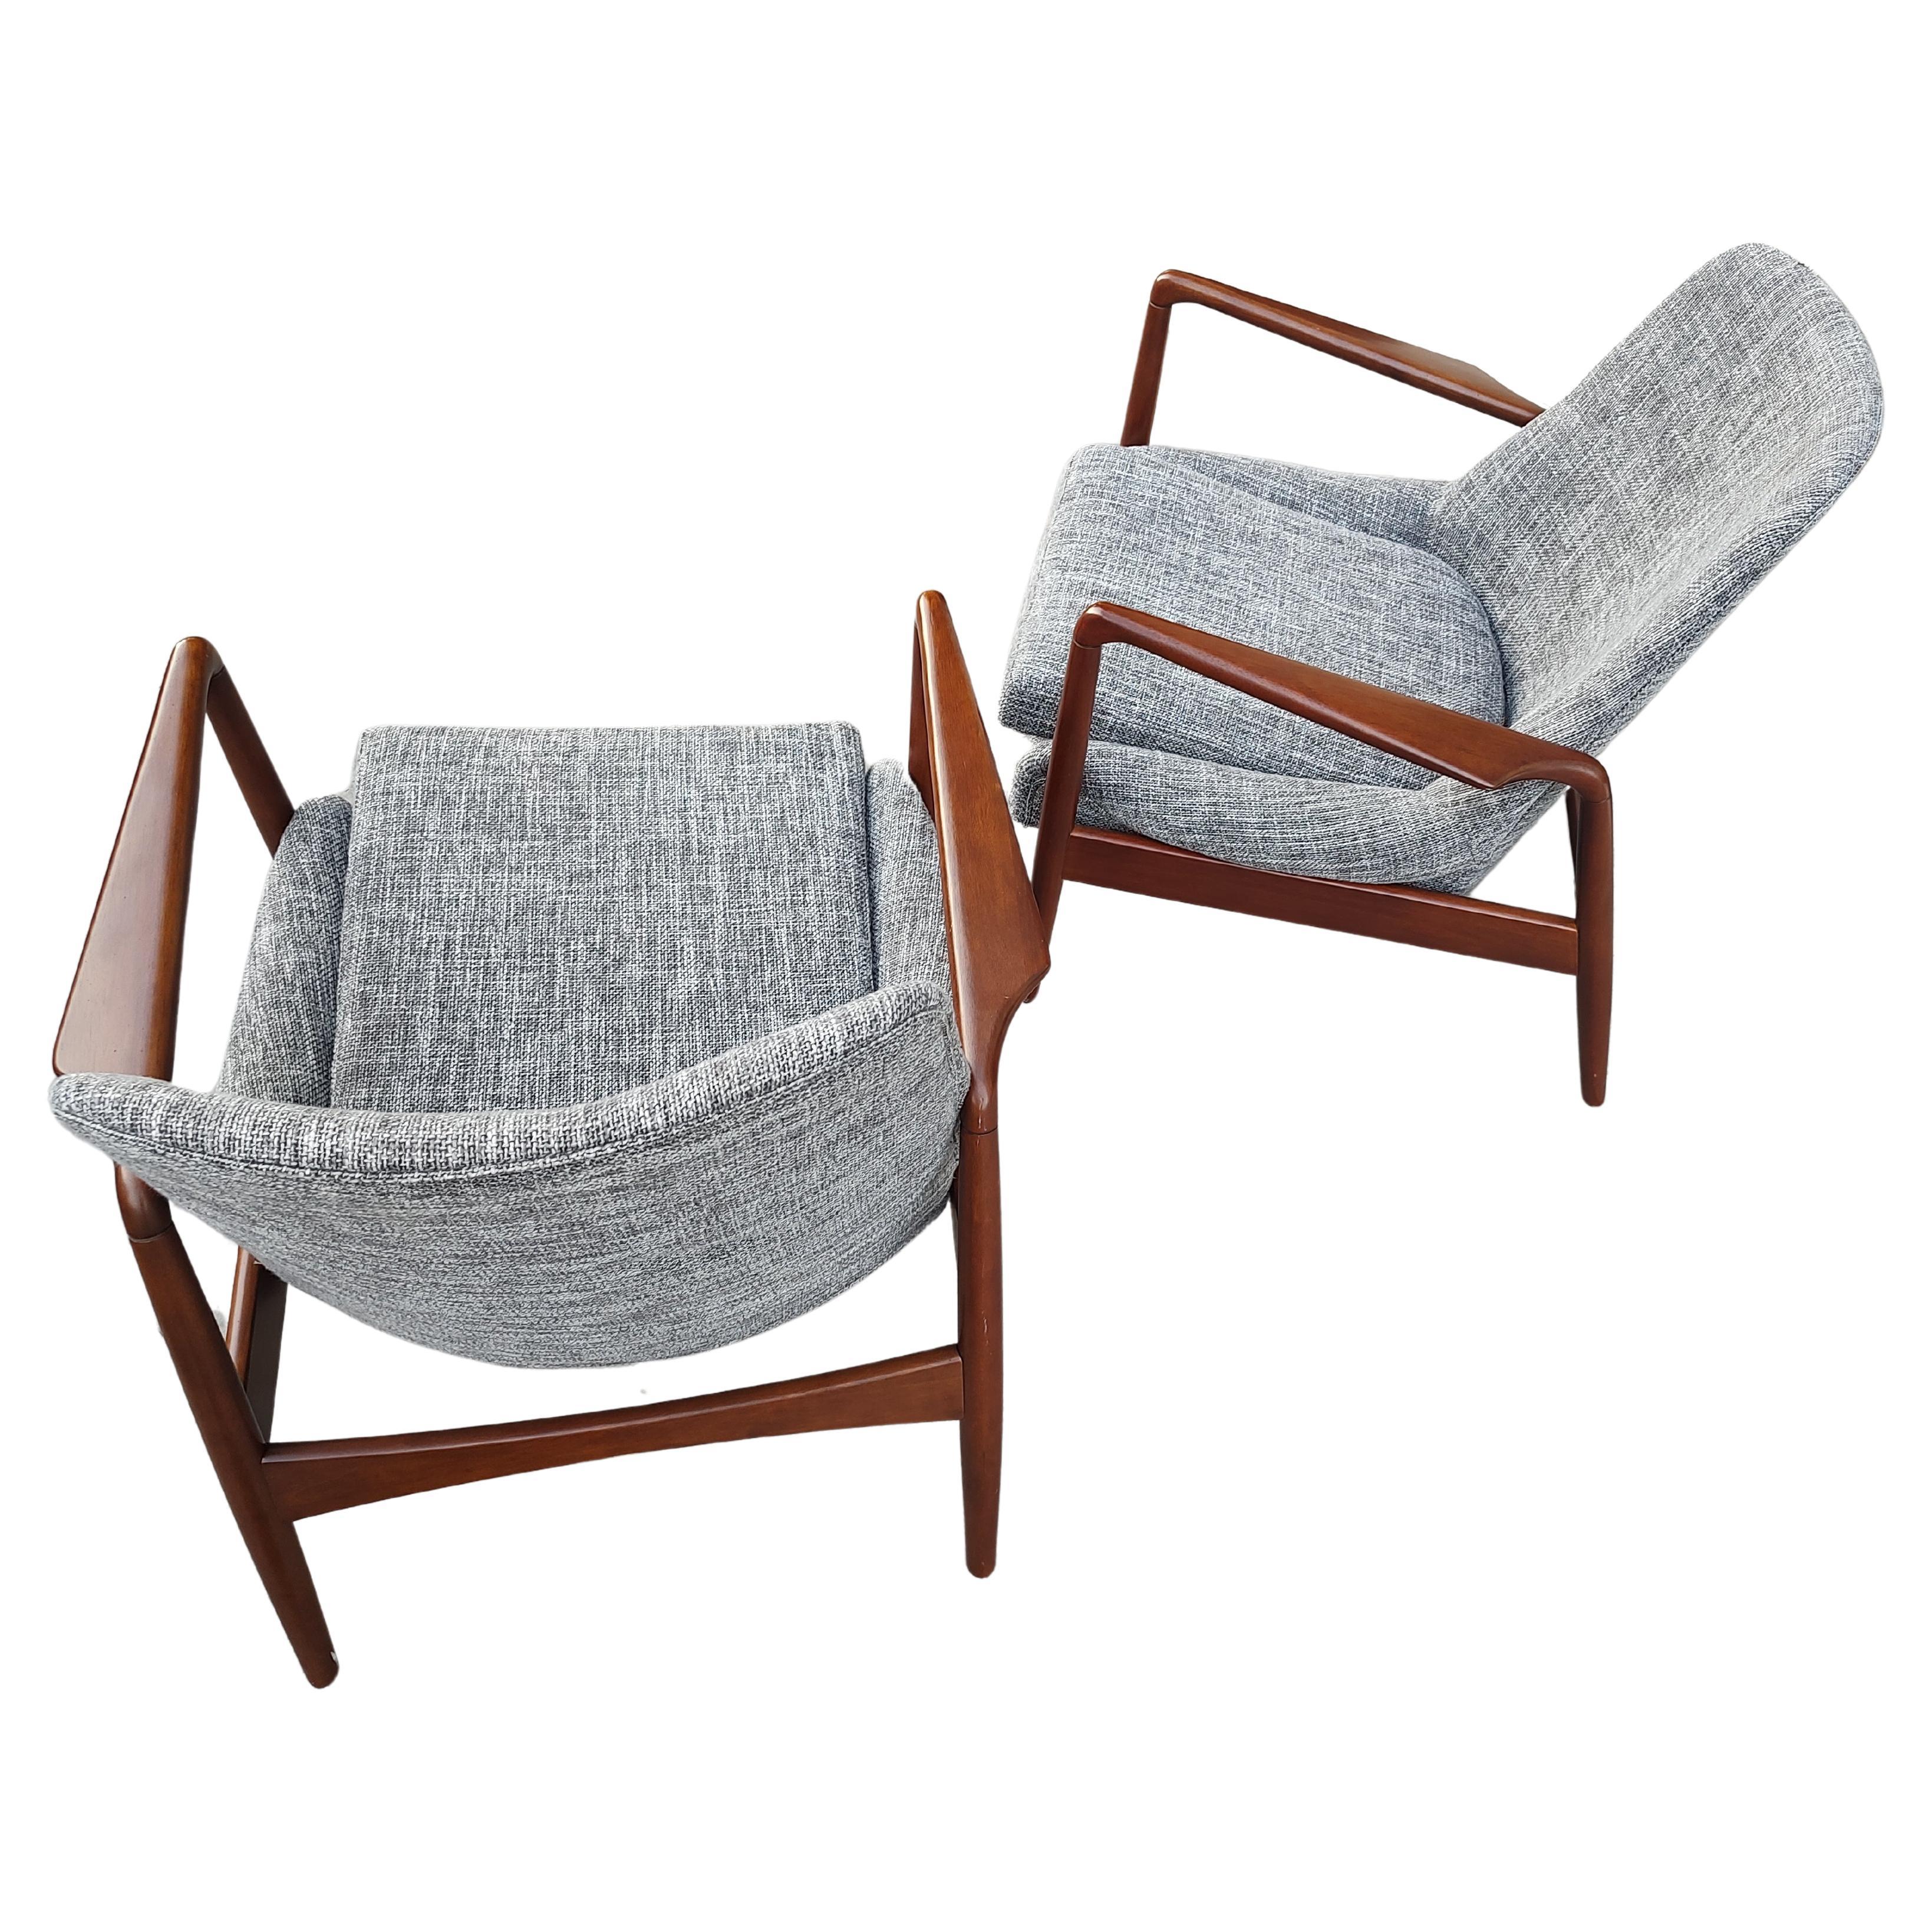 Hand-Crafted Pair of Mid Century Danish Modern Lounge Chairs style of Ib Kofod Larsen  For Sale